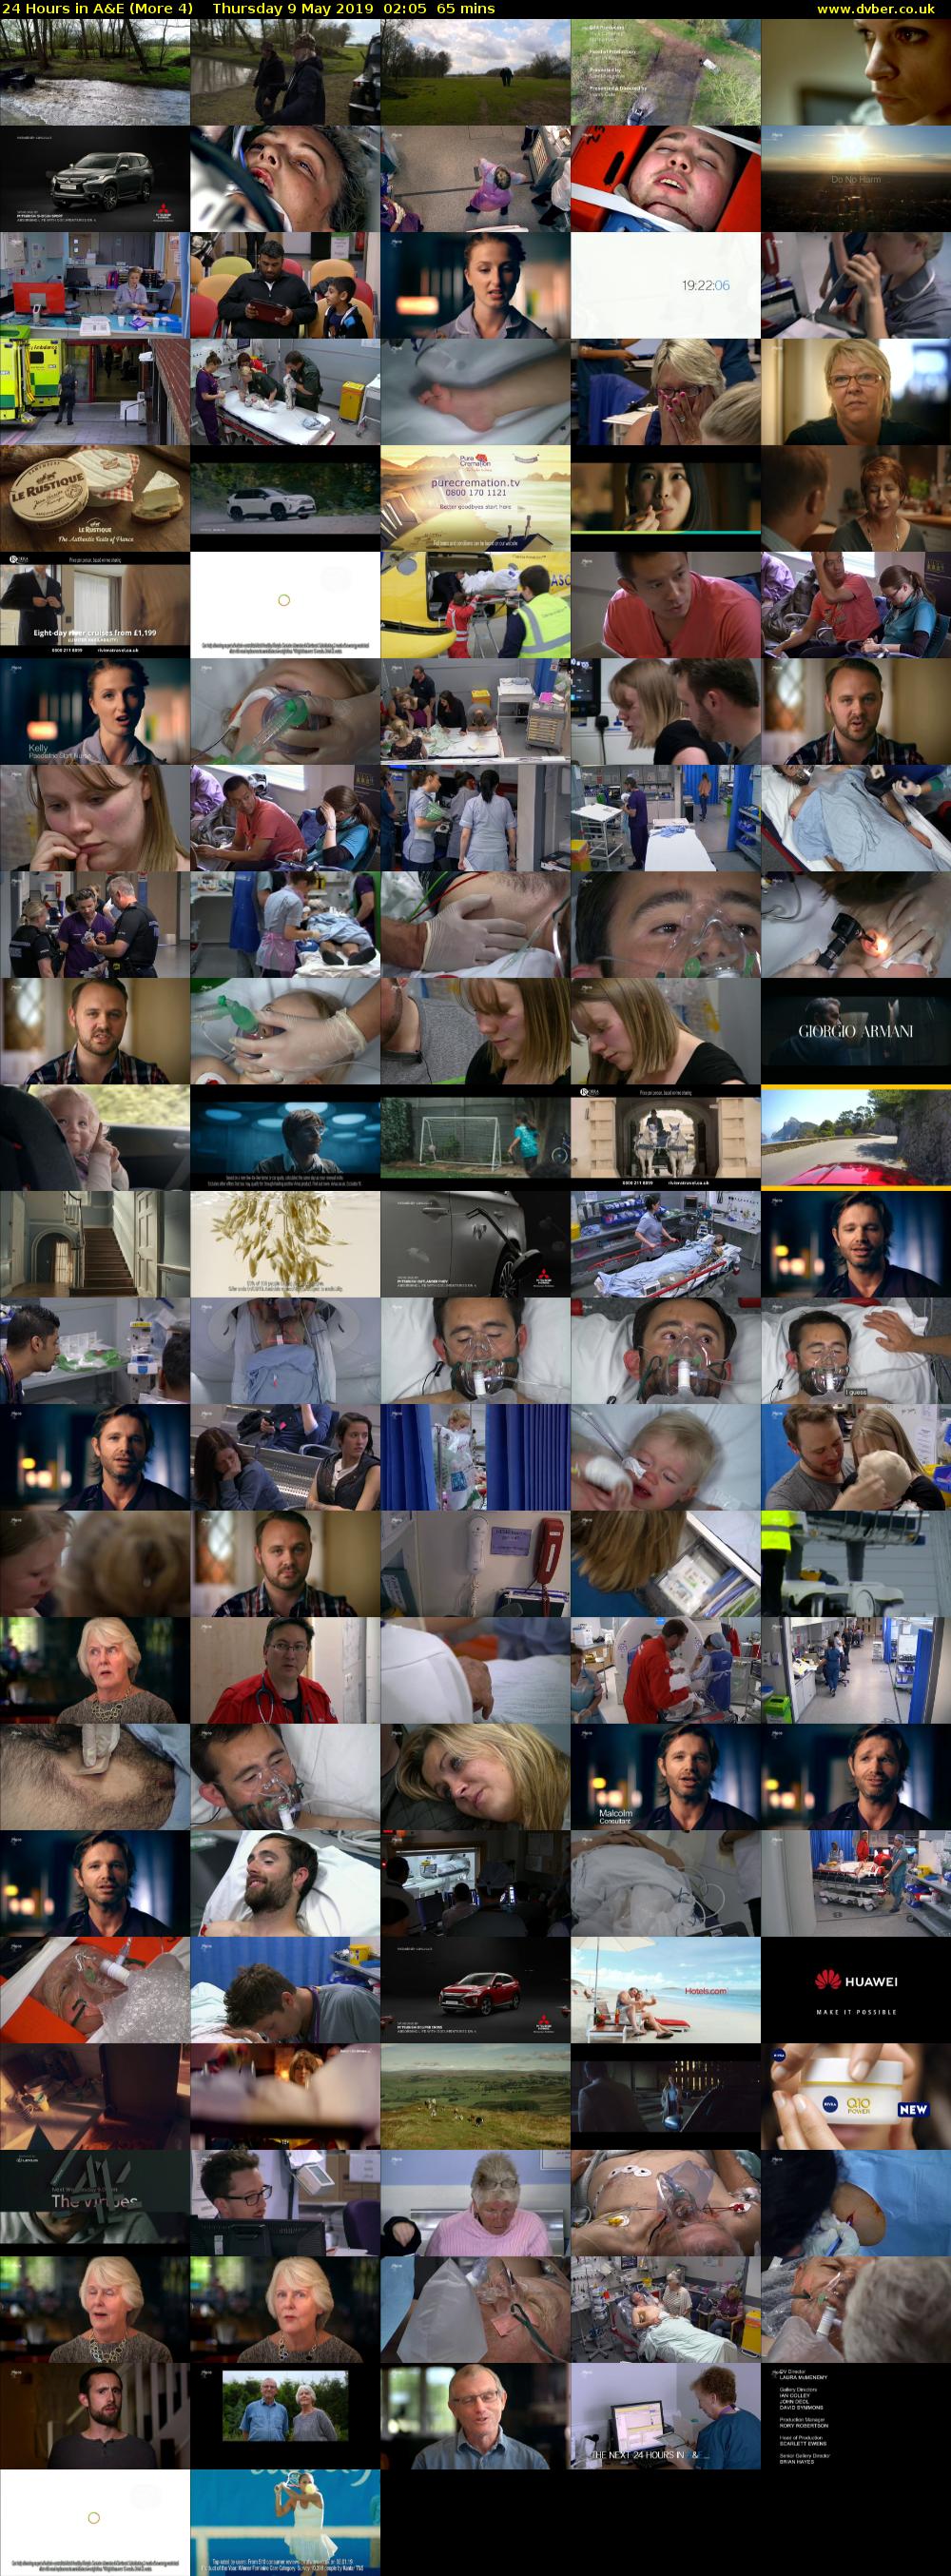 24 Hours in A&E (More 4) Thursday 9 May 2019 02:05 - 03:10